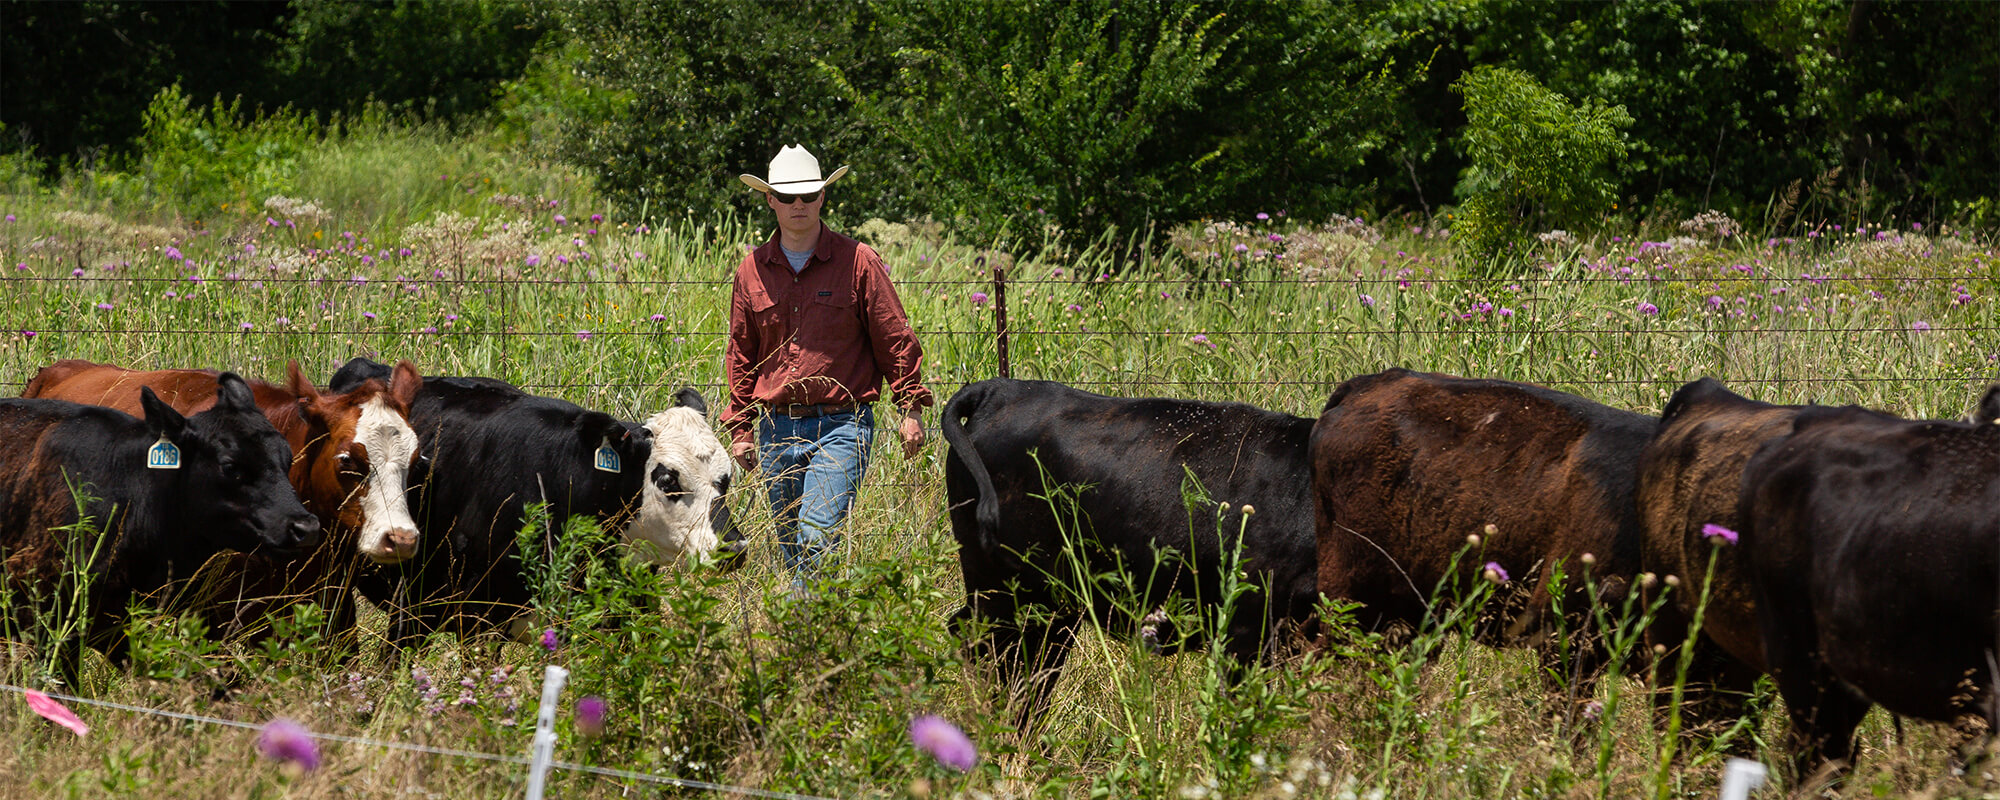 10 Things You Should Do To Get Started With Regenerative Grazing